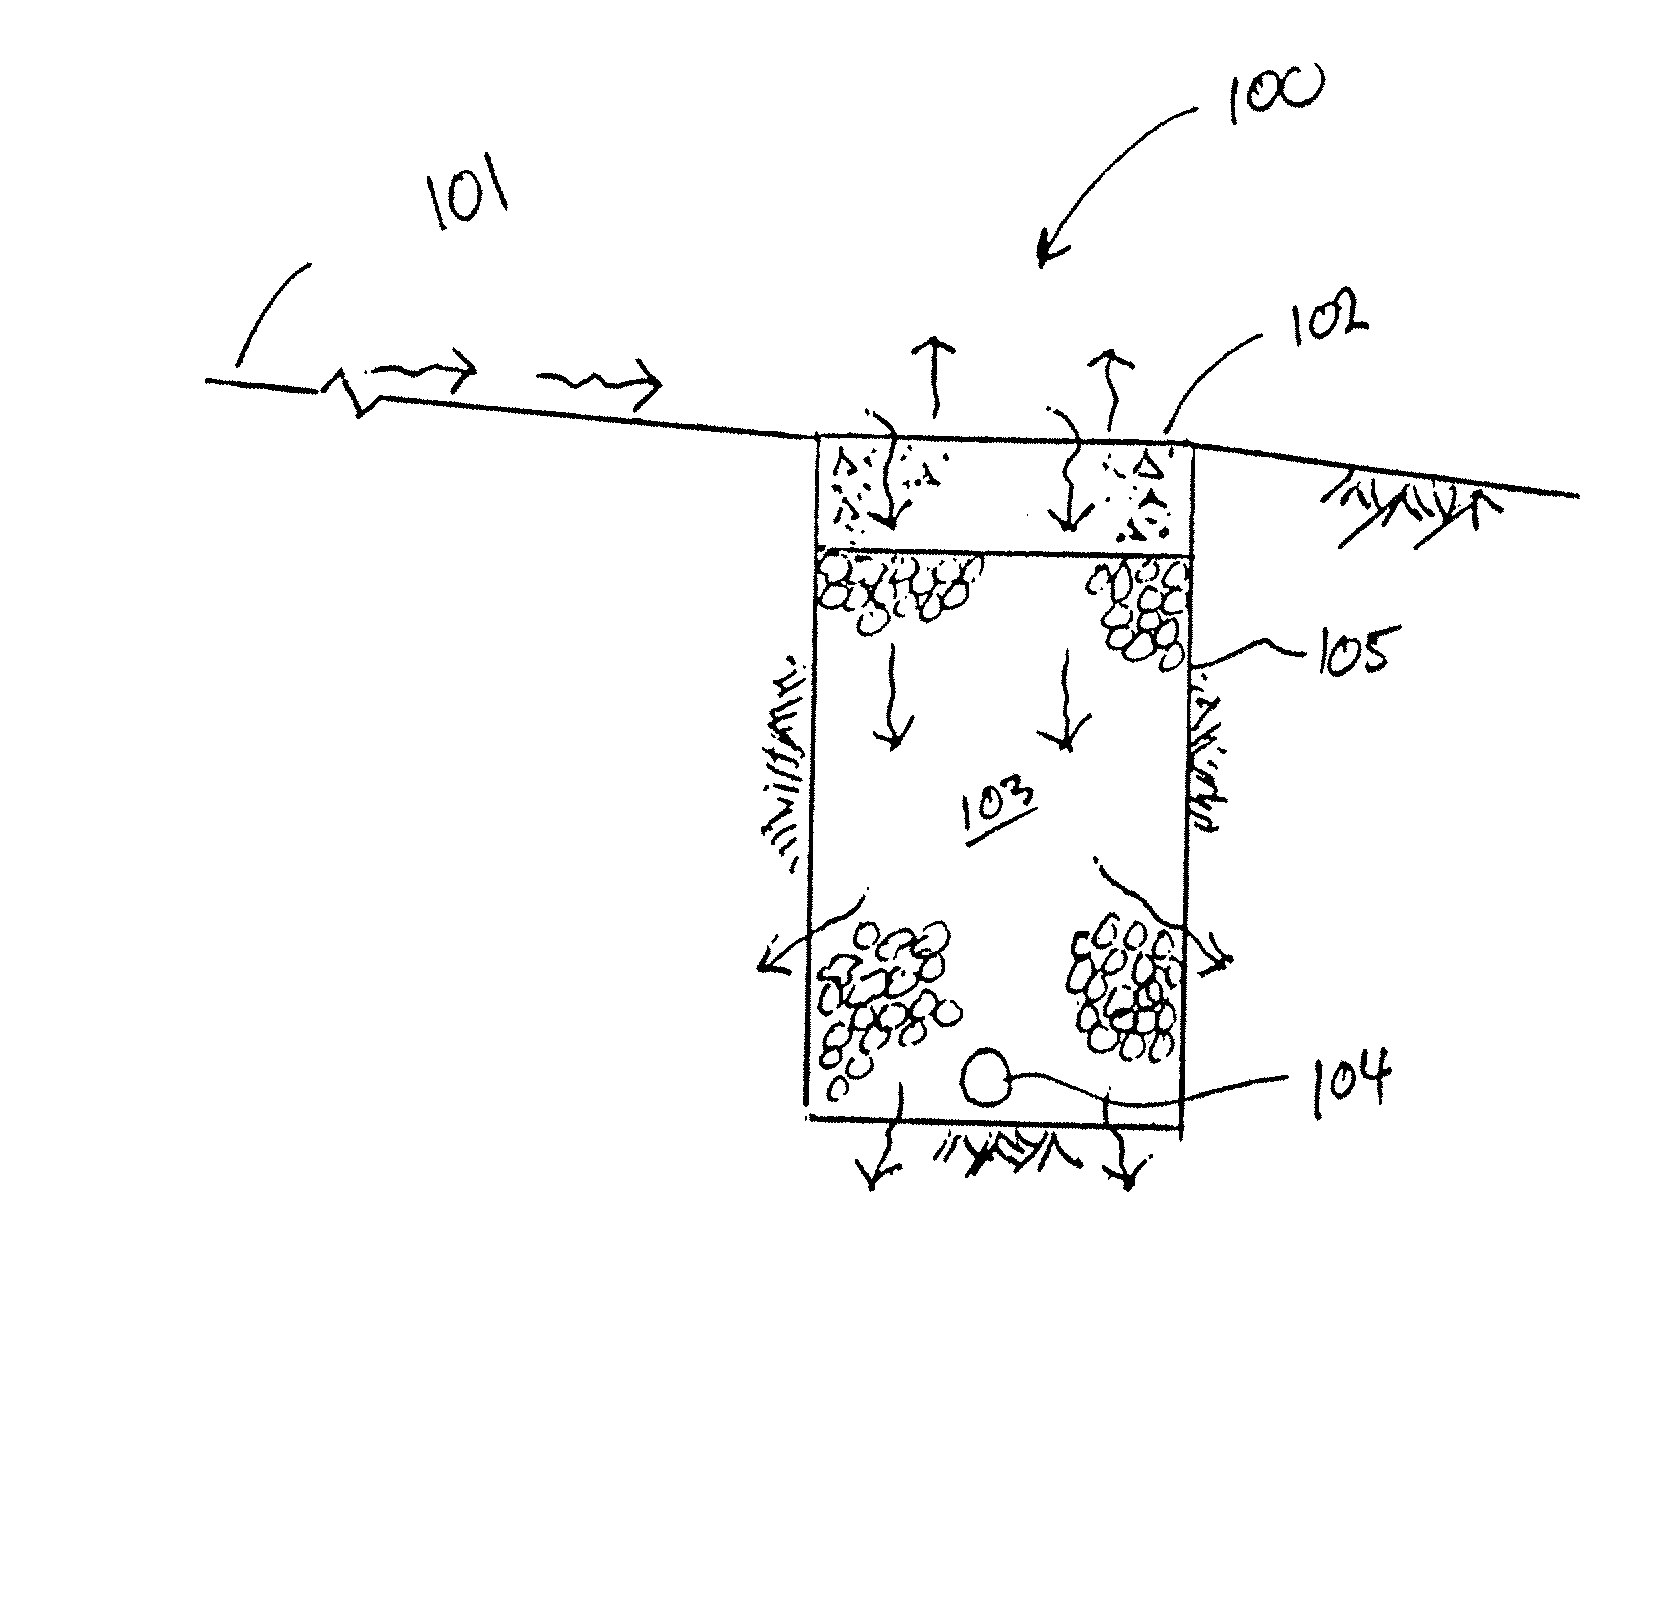 Clarification and Sorptive-Filtration System for the Capture of Constituents and Particulate Matter in Liquids and Gases